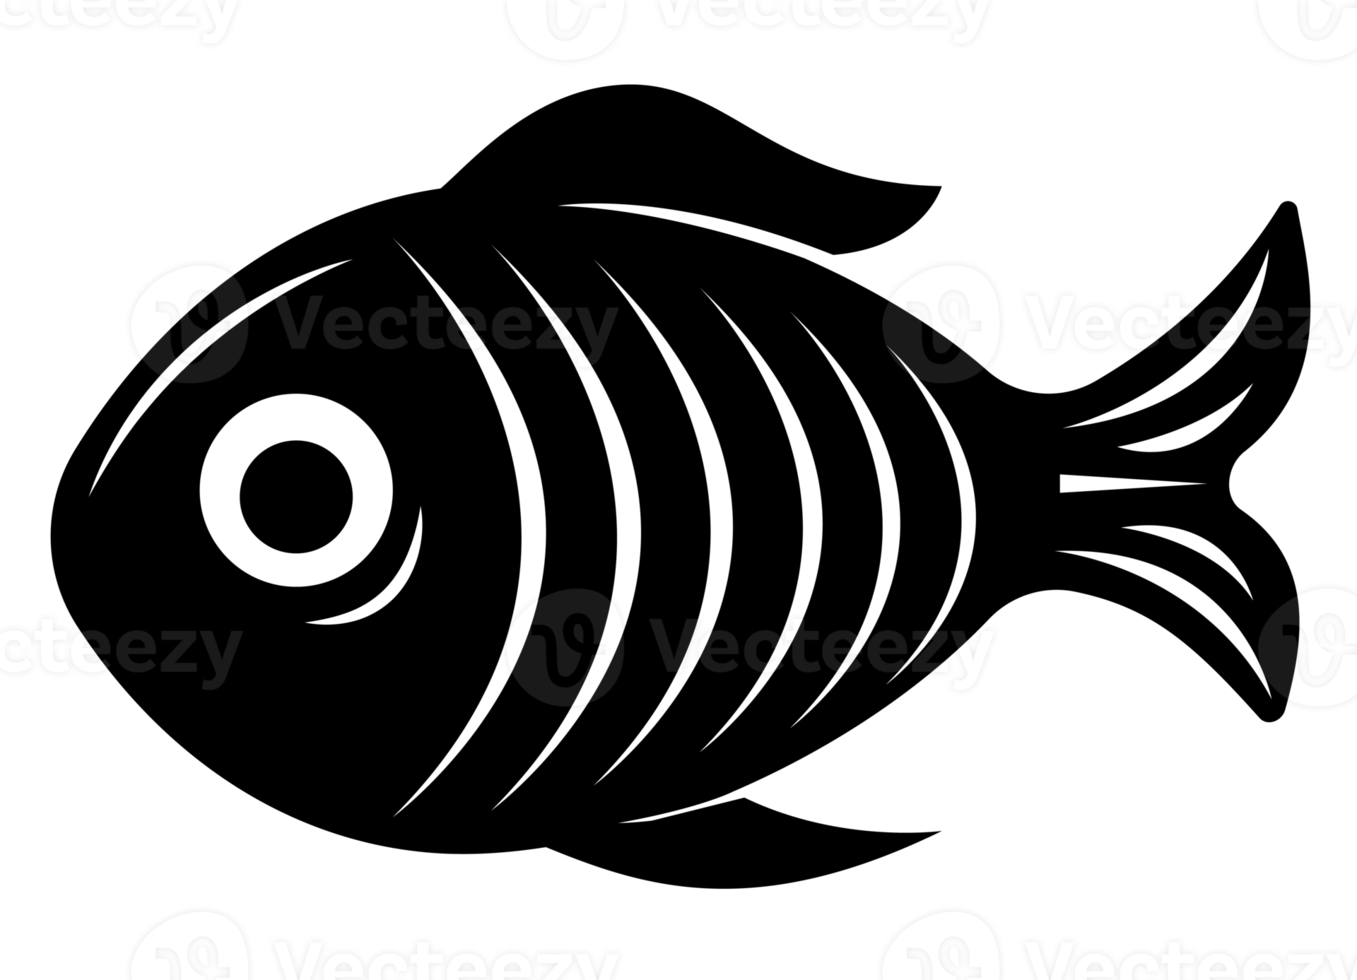 Fish illustration black and white PNG with transparent background. Abstract, stylized fish illustration.